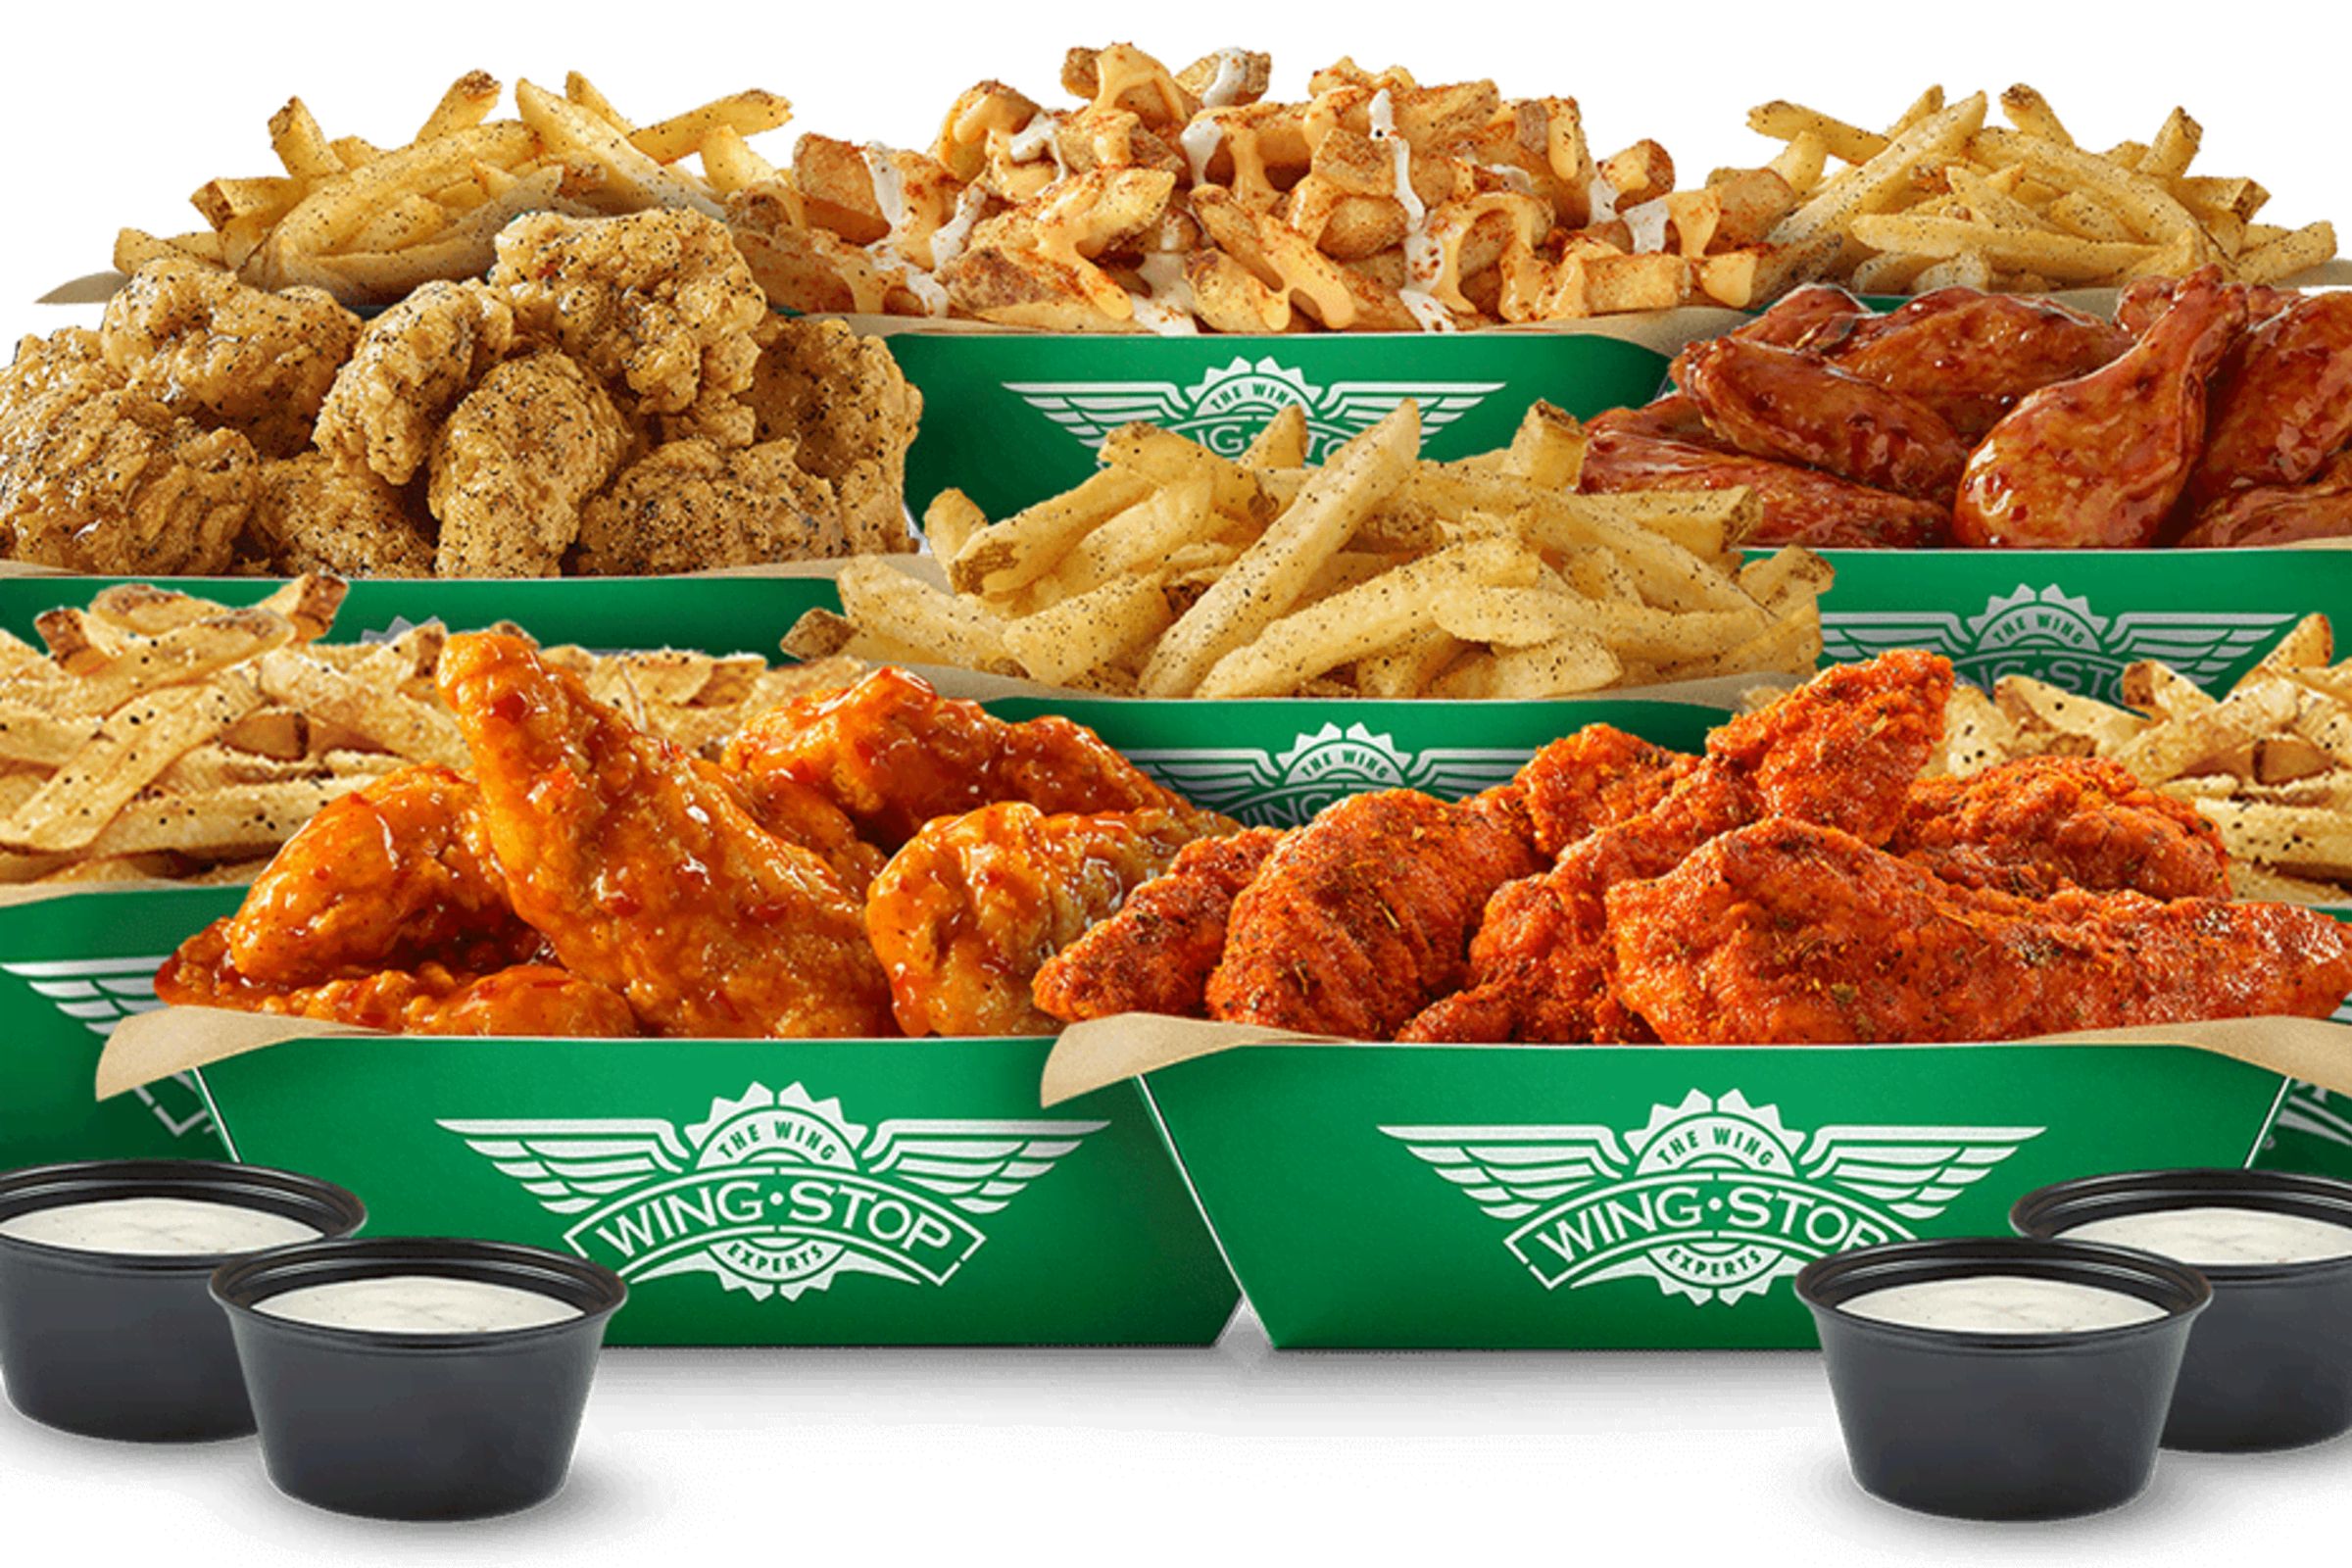 Wingstop Offers Free Delivery Through to September 30 with Online and